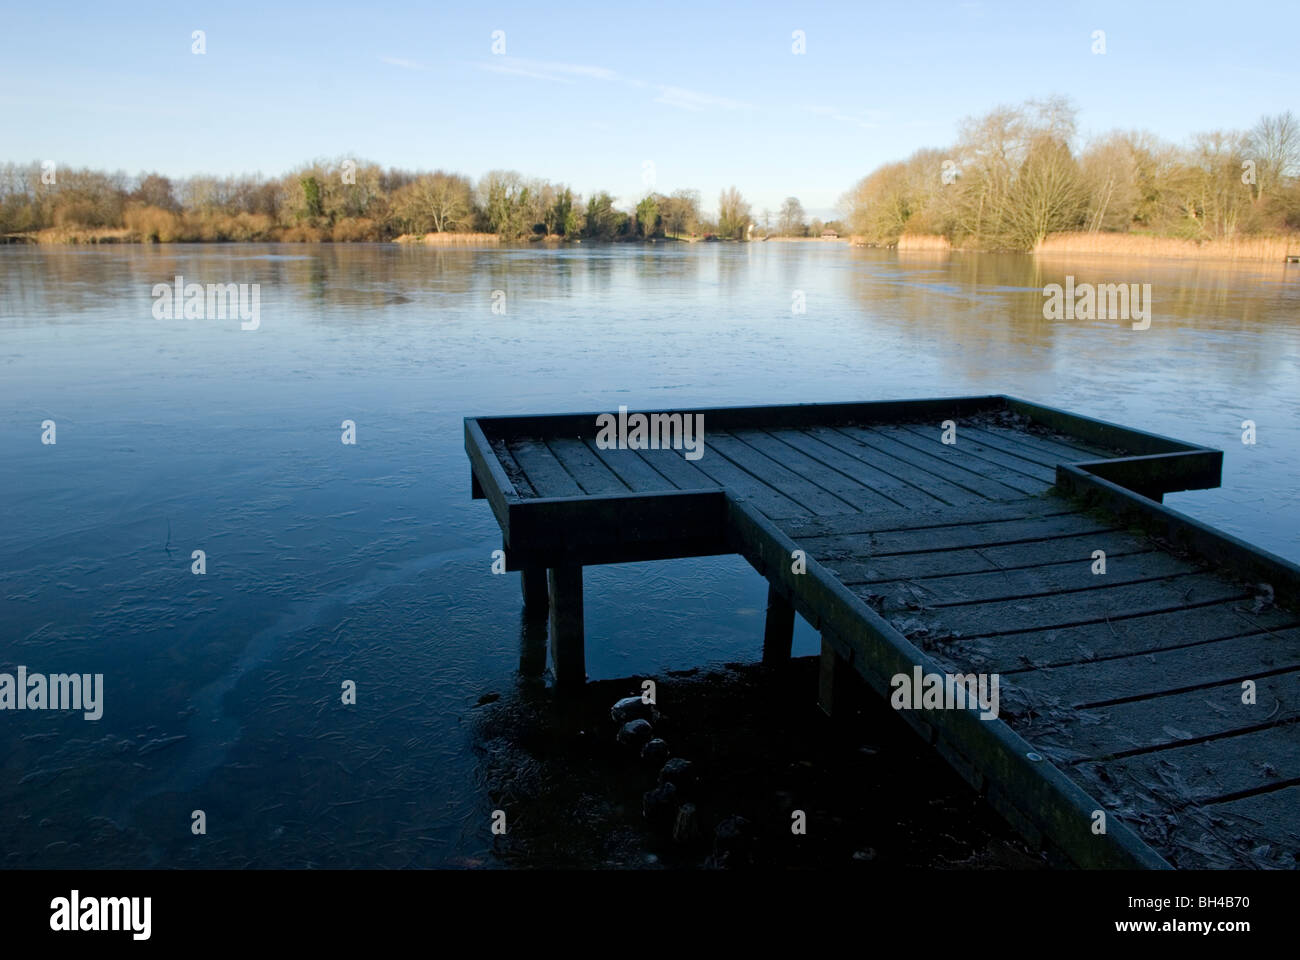 Coate Water Country Park , Wiltshire, UK, janvier 2010. Banque D'Images